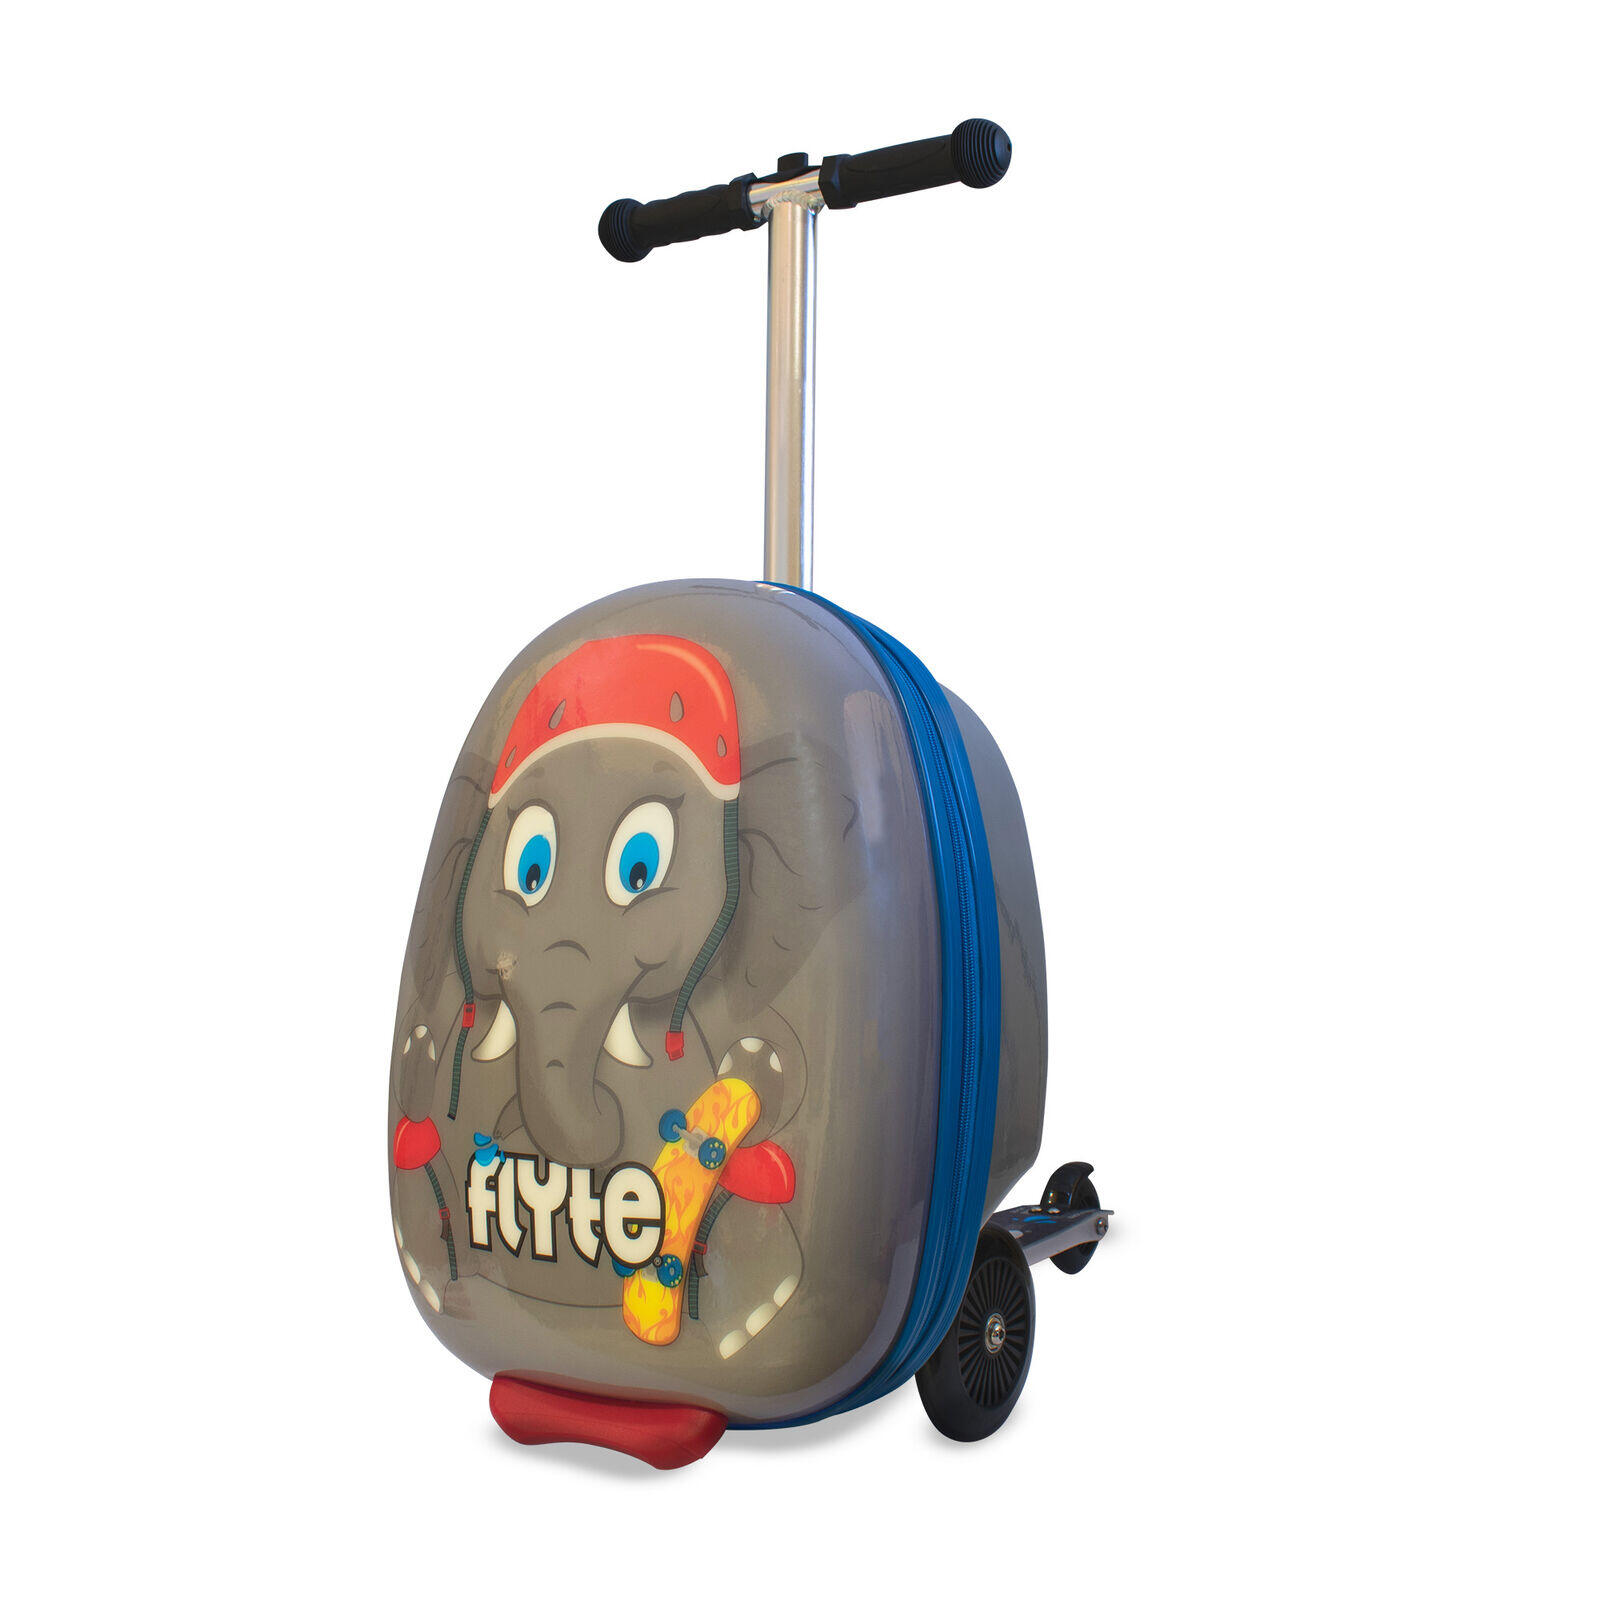 Flyte Midi 18 Inch Eddie the Elephant Scooter Suitcase 1/8